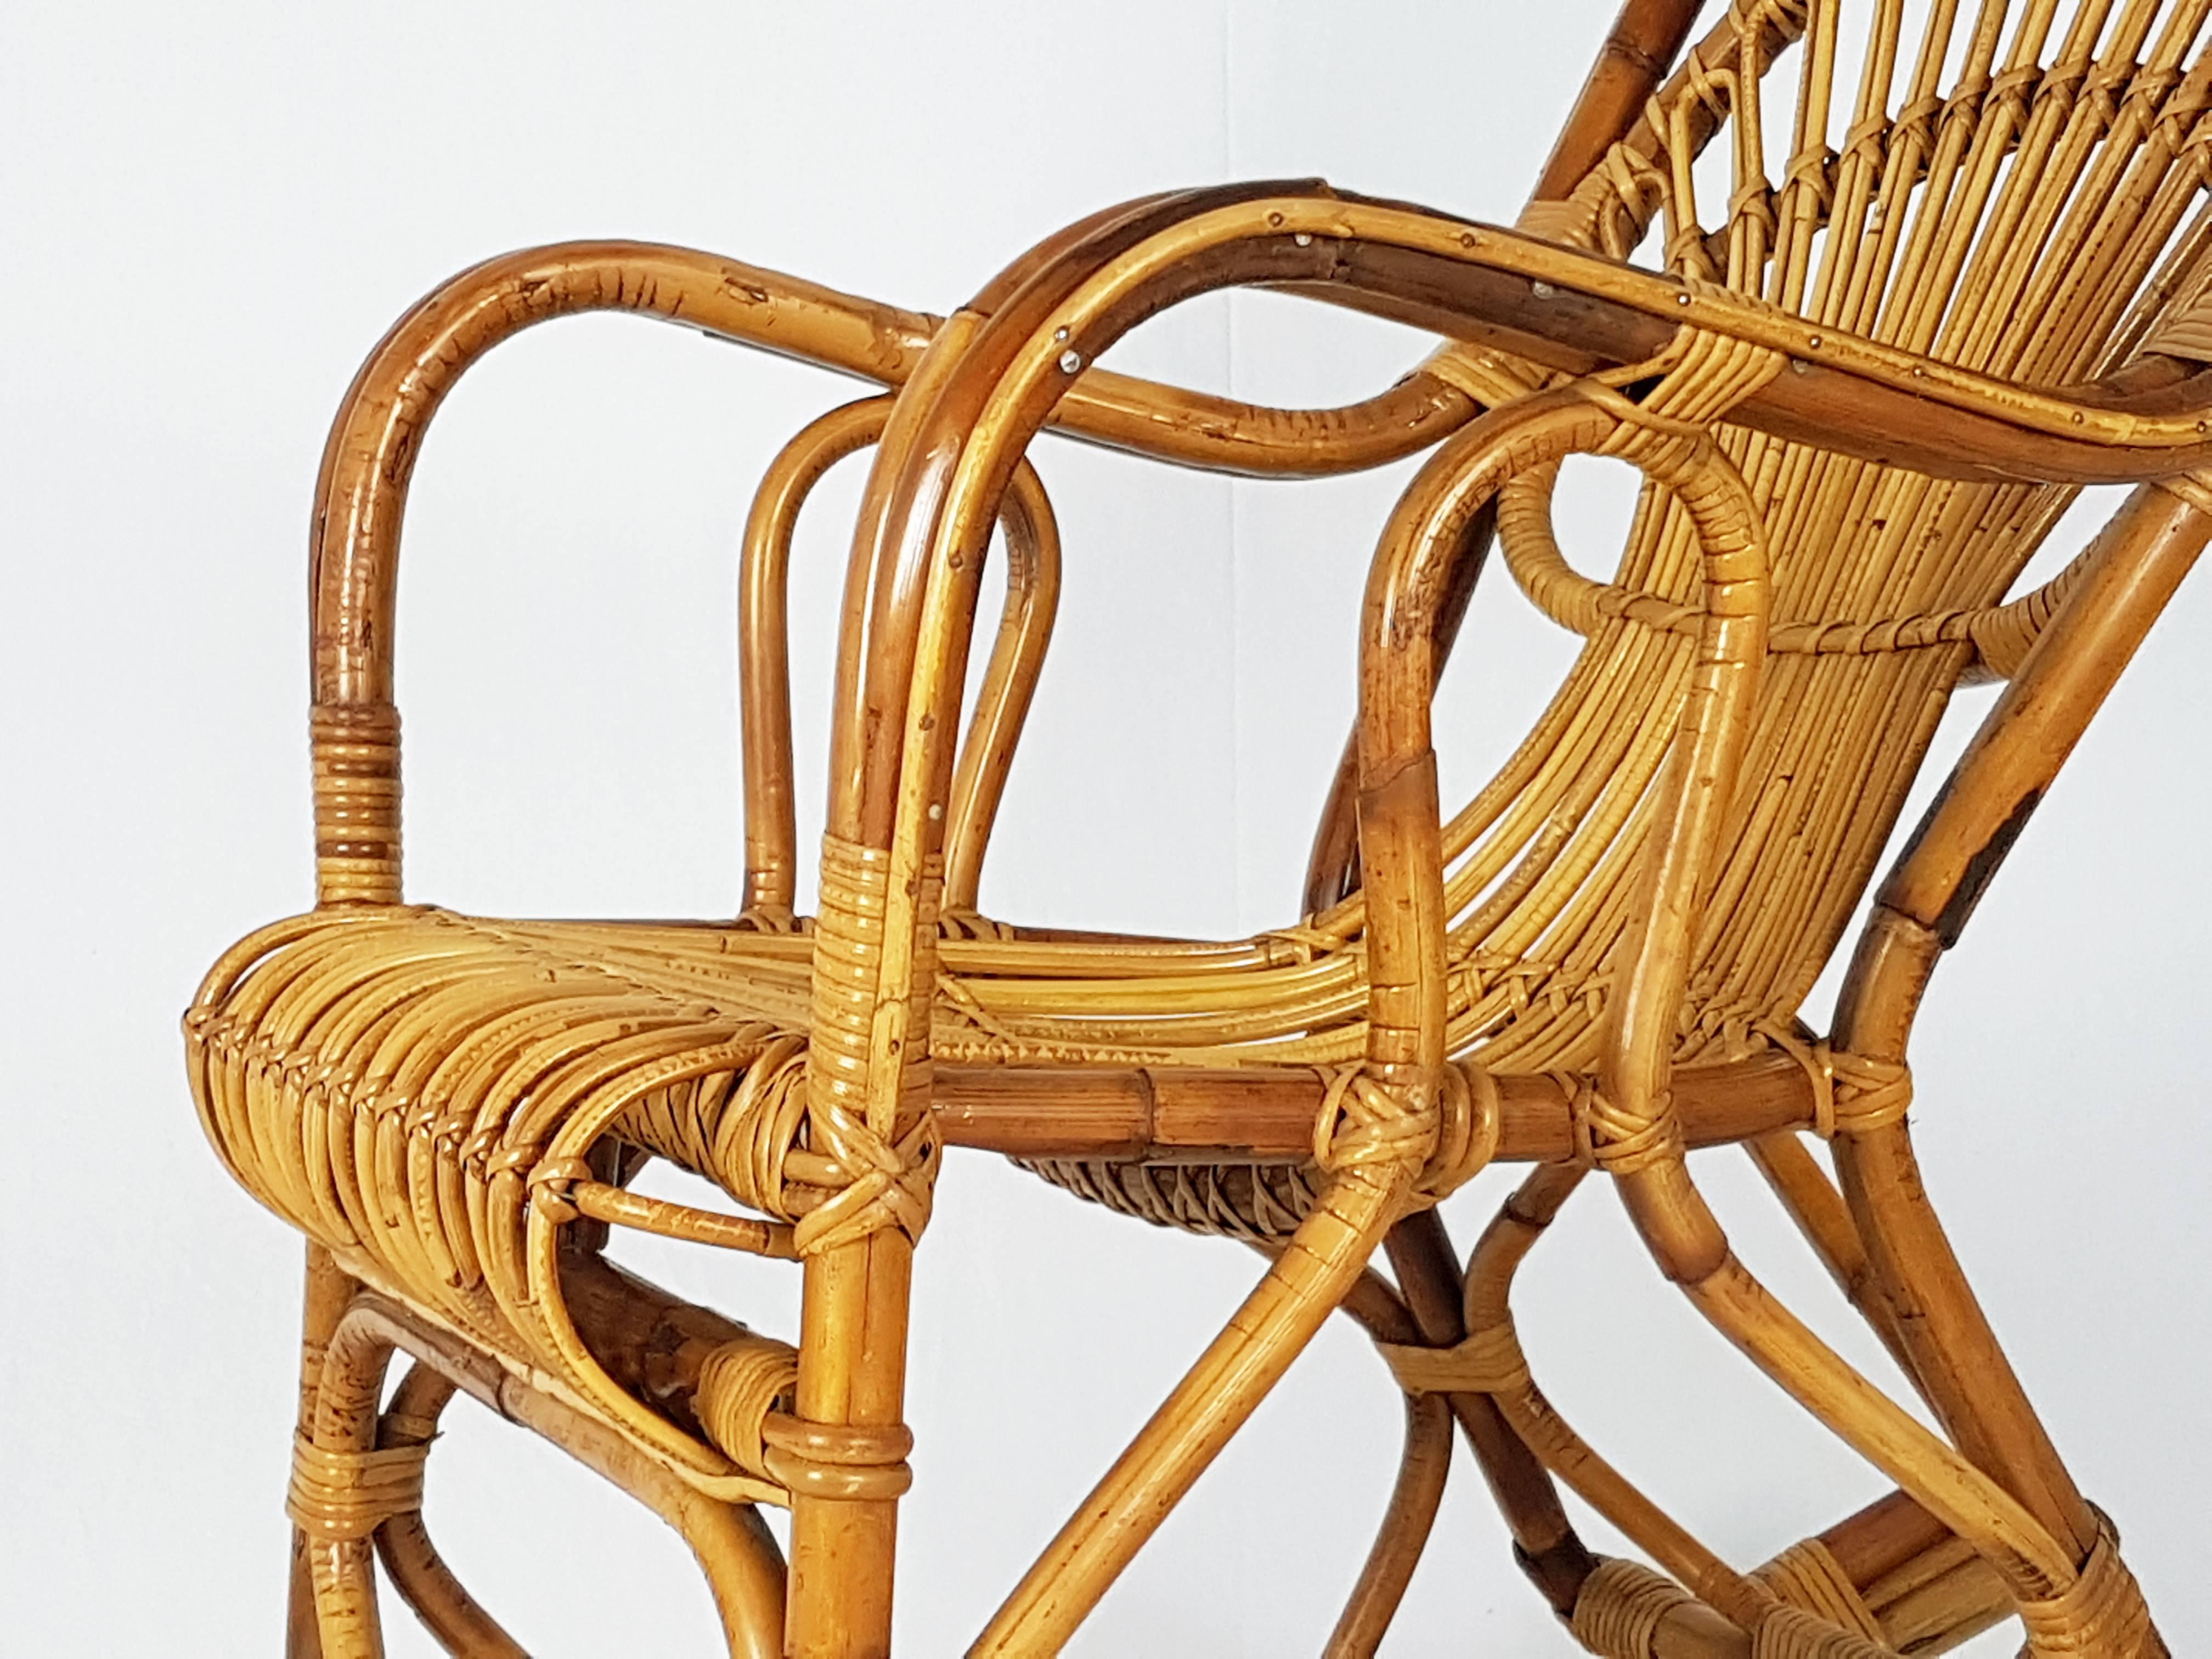 This beautiful rocking chair was produced in Italy during the 1960s. It is handmade from rattan and remains in very good vintage condition, few rush losses close to the base as showed in picture. Light wear consistent with age and use at the